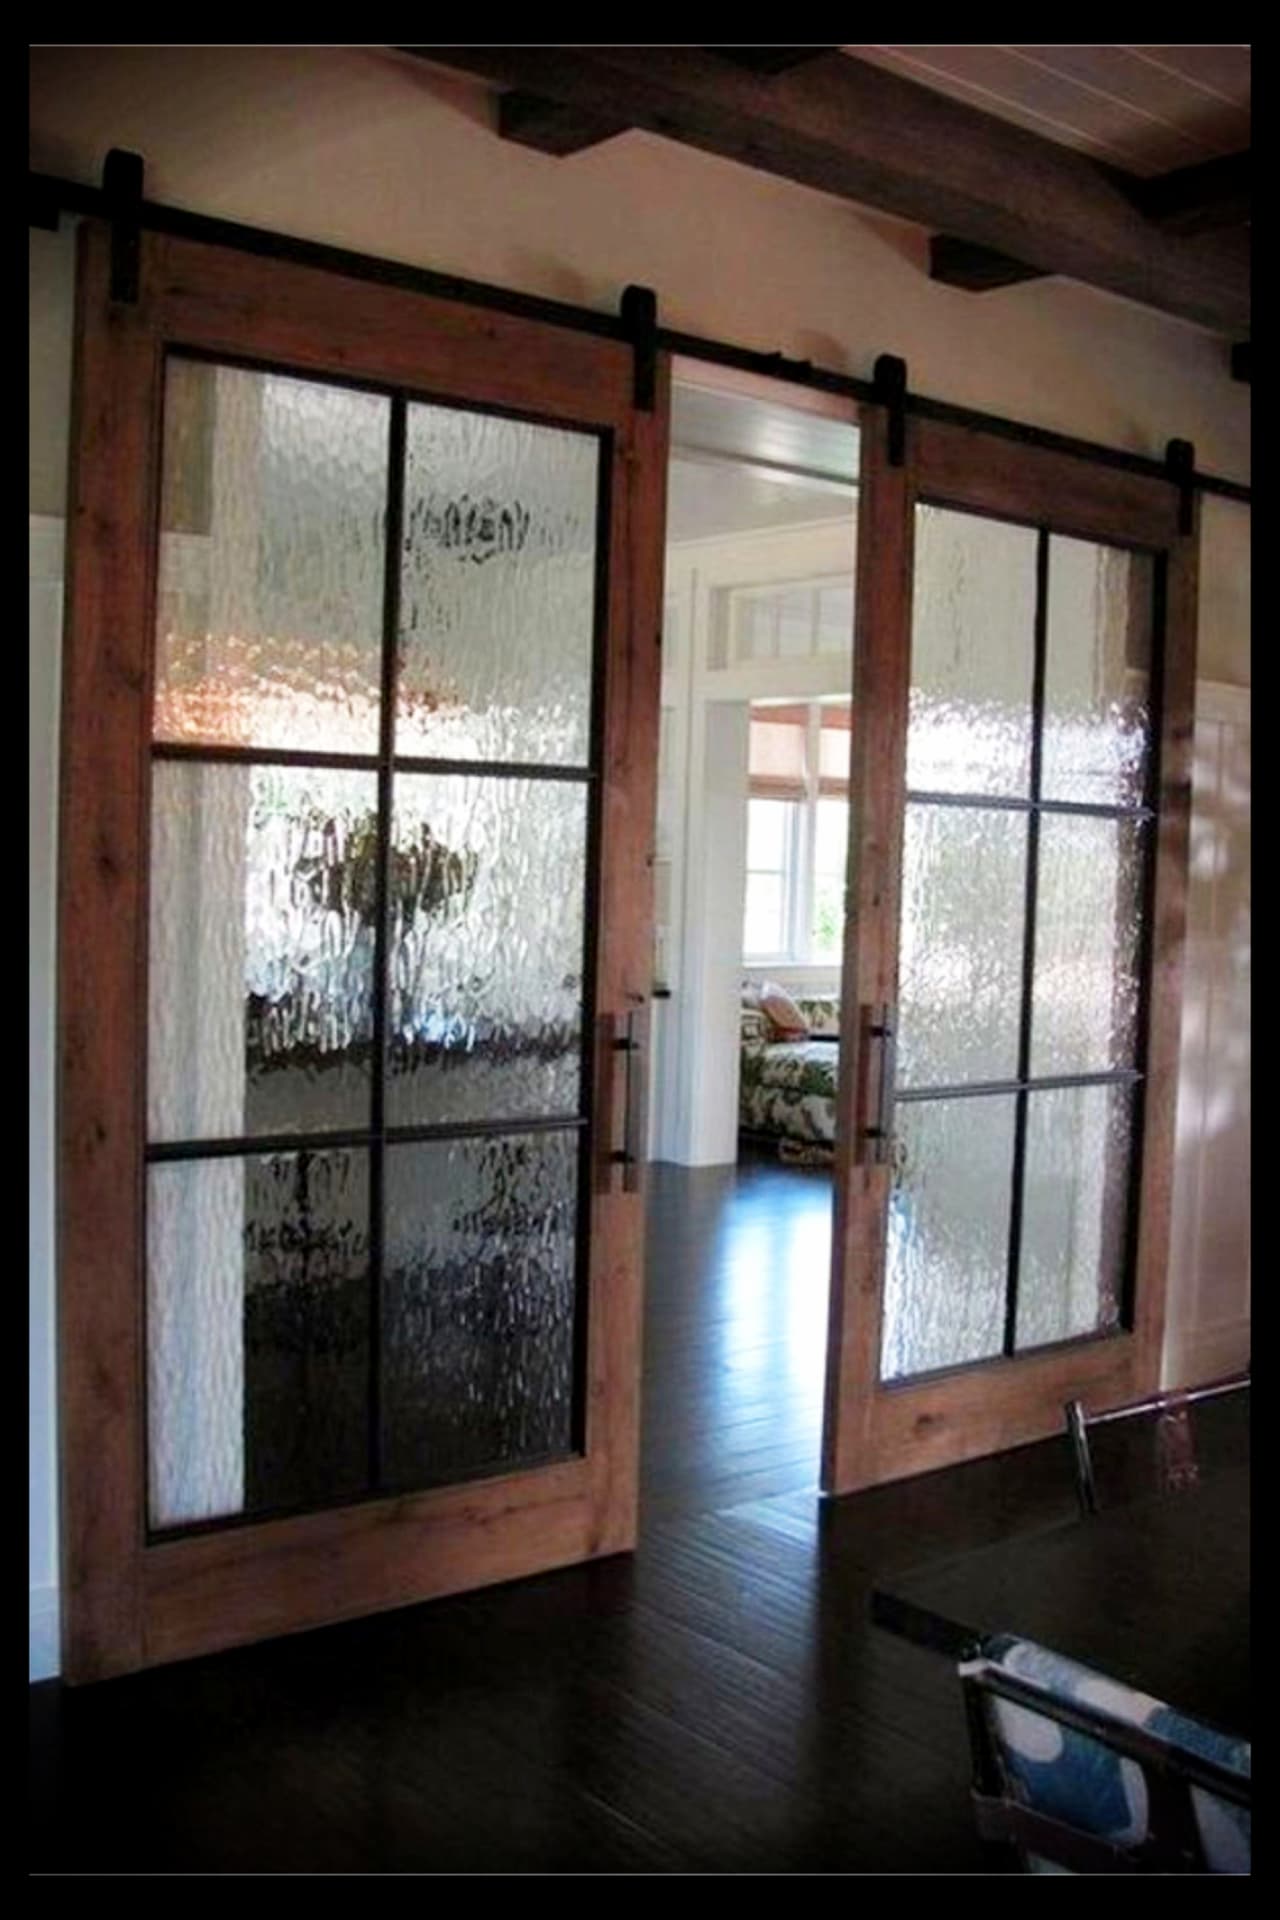 sliding barn door ideas - sliding barn doors in the house - DIY interior sliding barn doors and double sliding barn doors pictures in houses.  Elegant, rustic and farmhouse style double barn doors for bathrooms, bedrooms, kitchens, living rooms, master bath, basements, closets, mud rooms, pantries and other small spaces.  Sliding barn doors DIY how to build barn doors projects and sliding barn doors for sale - also sliding barn door installation tips